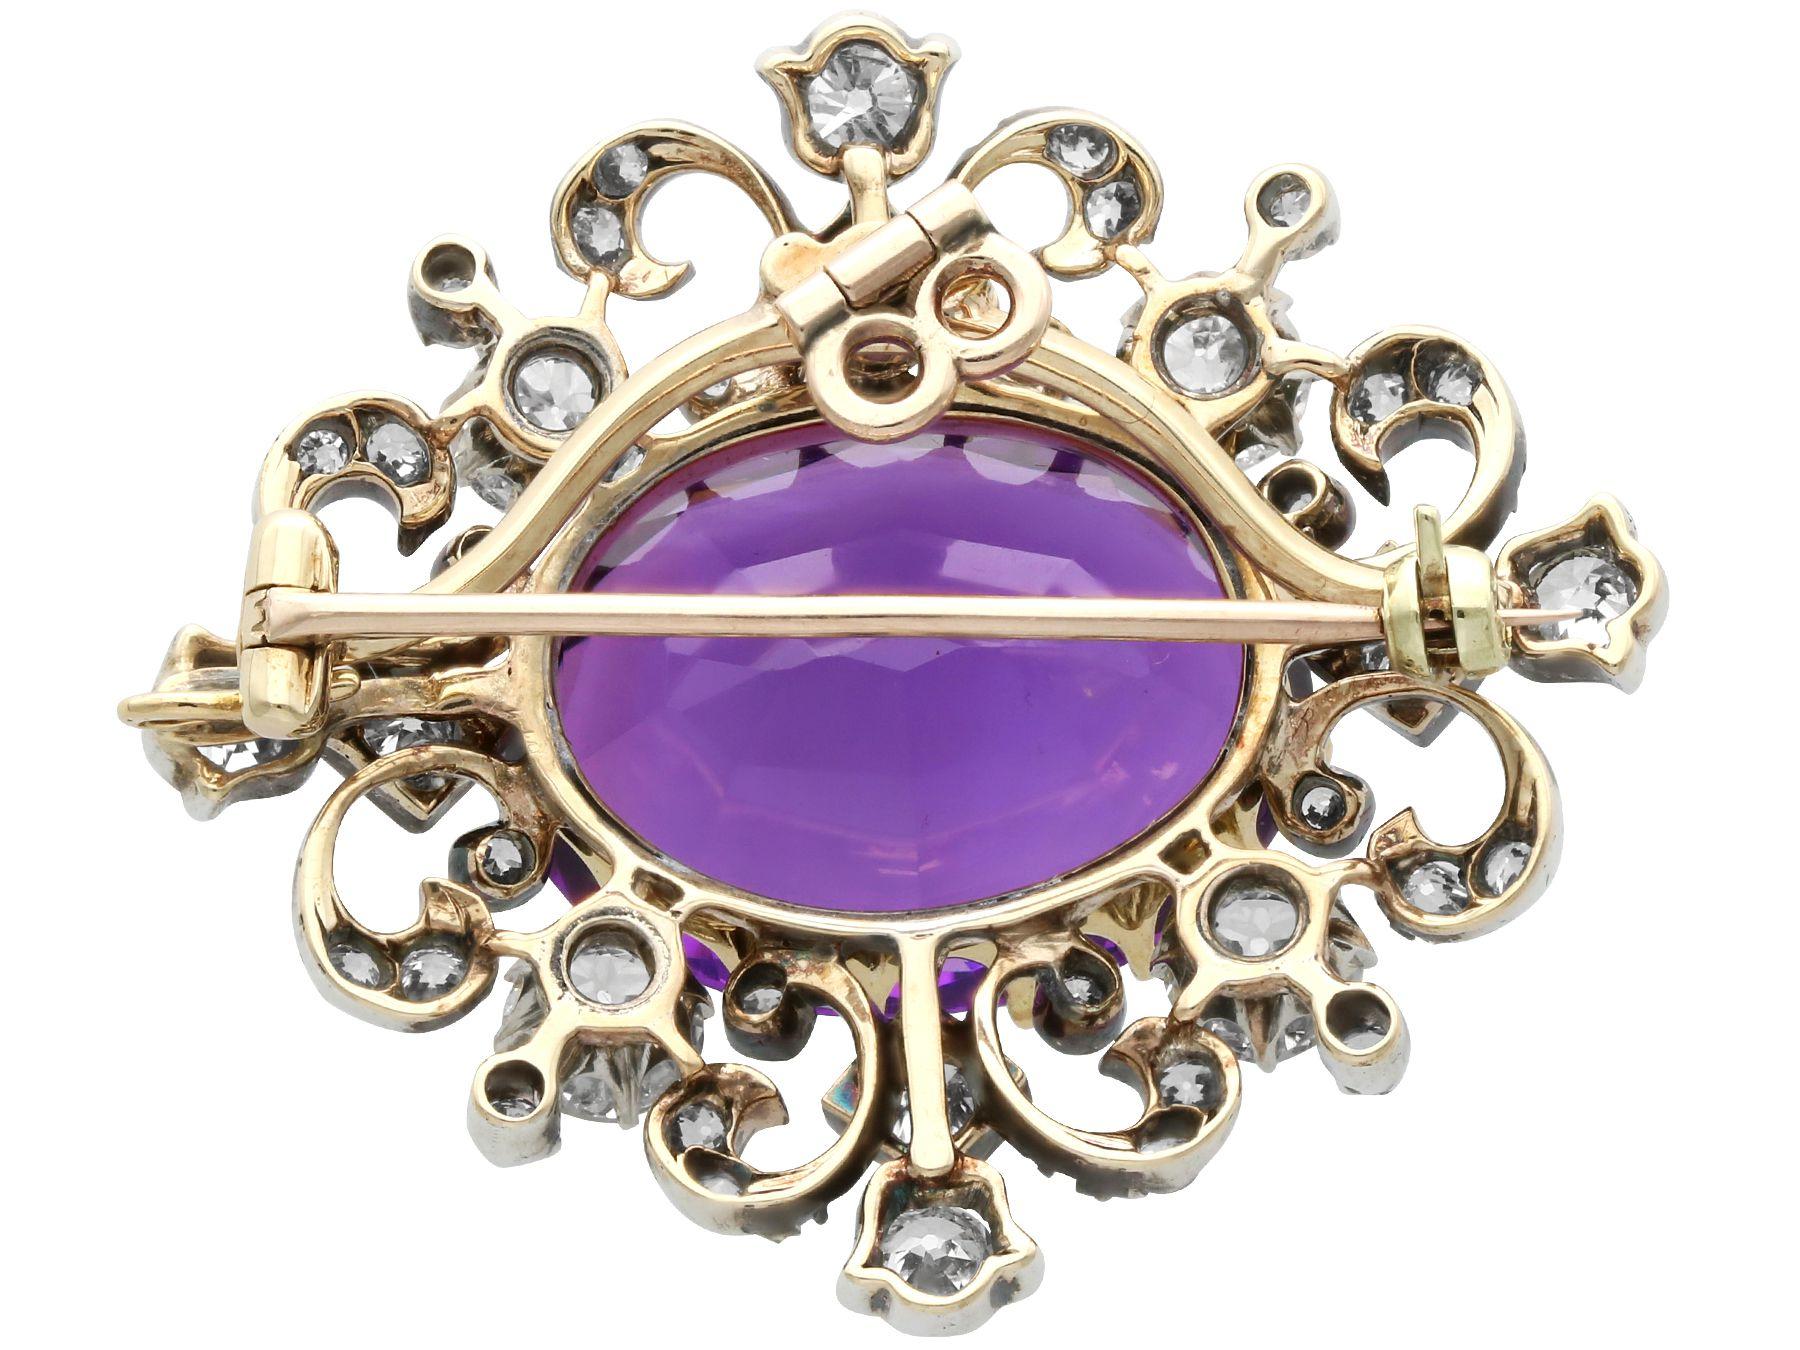 Antique 18.25ct Amethyst and 4.43ct Diamond 9k Yellow Gold Brooch / Pendant 1